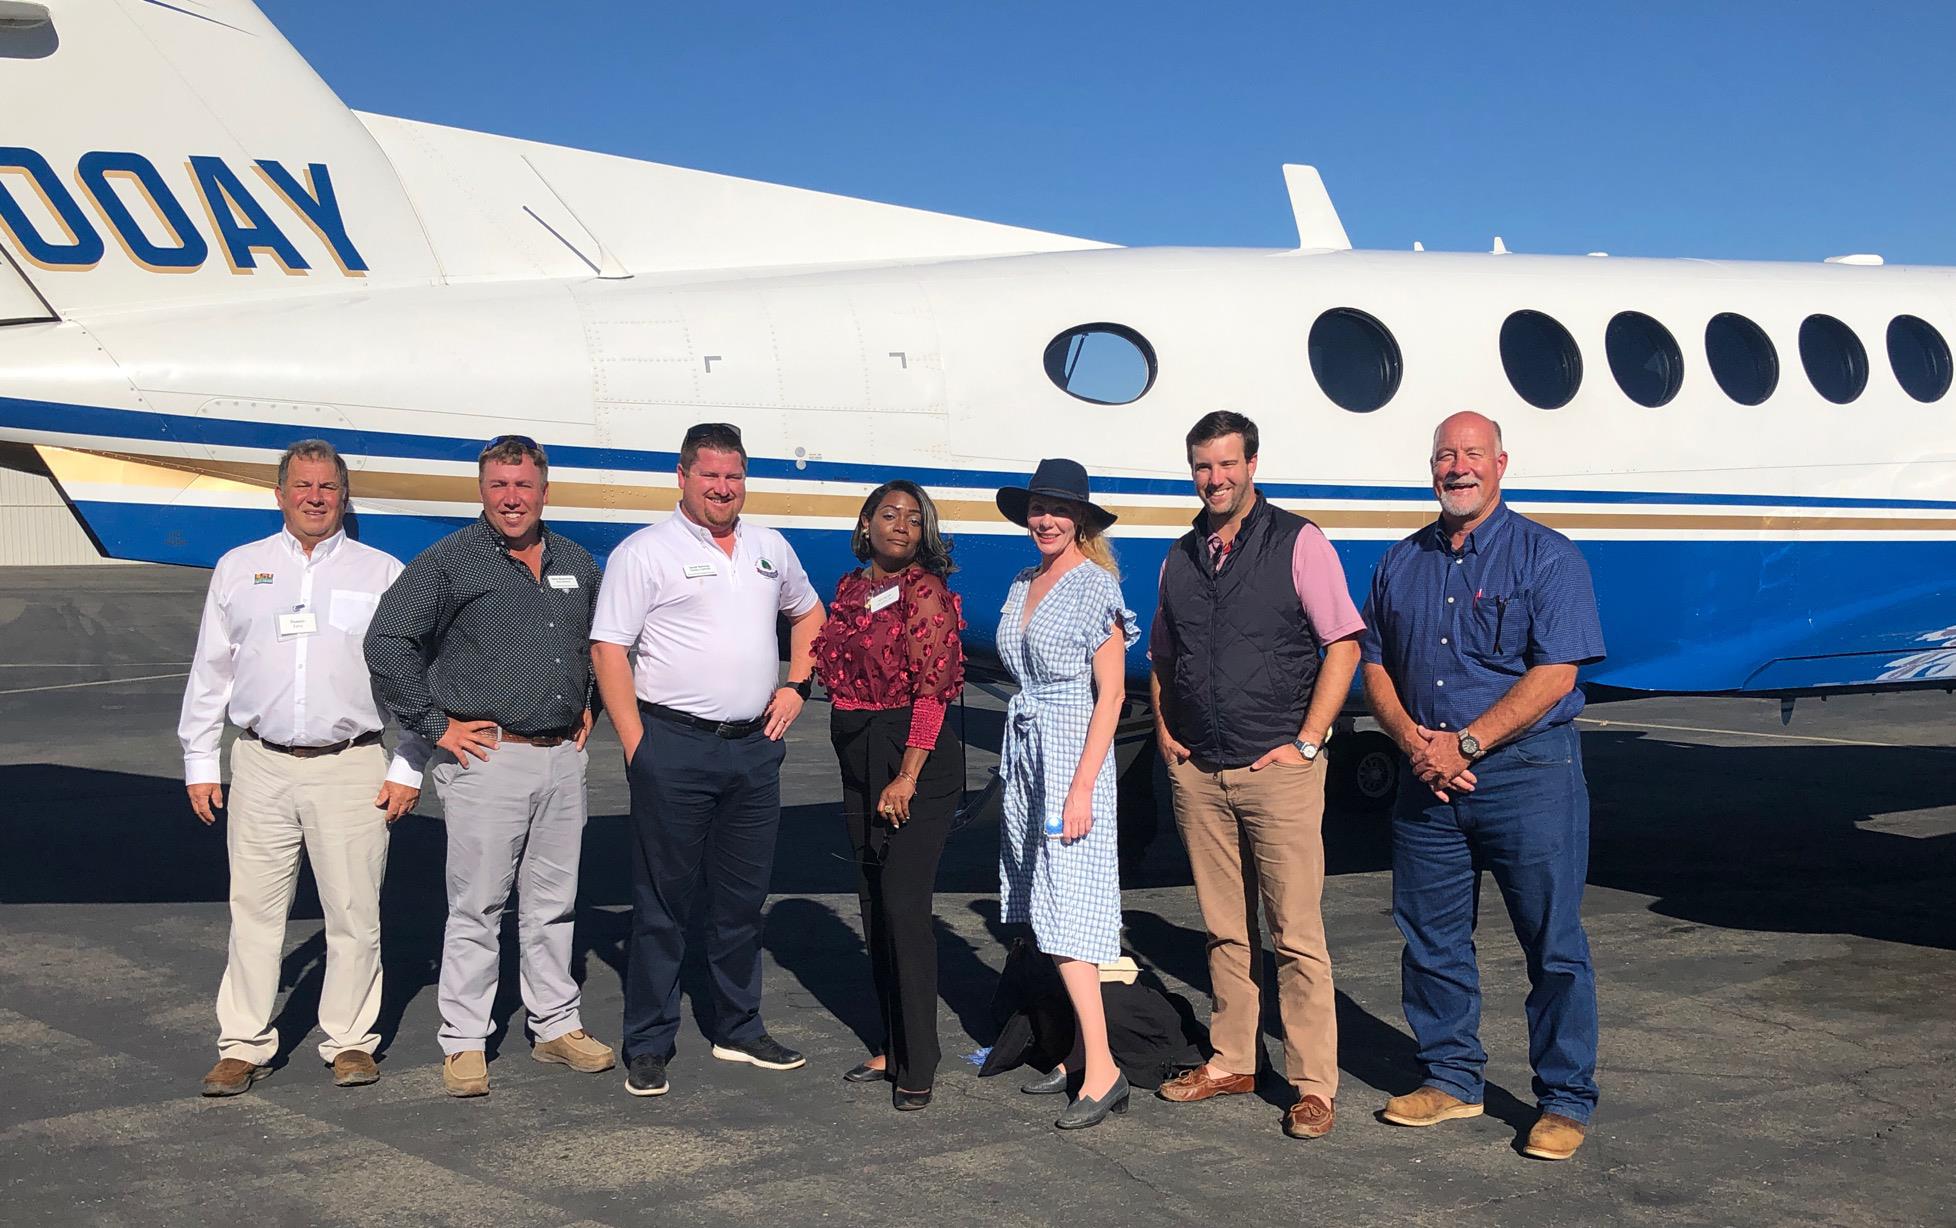 2021-23 Leadership CA Session, group shot on the tarmac in front of small plane